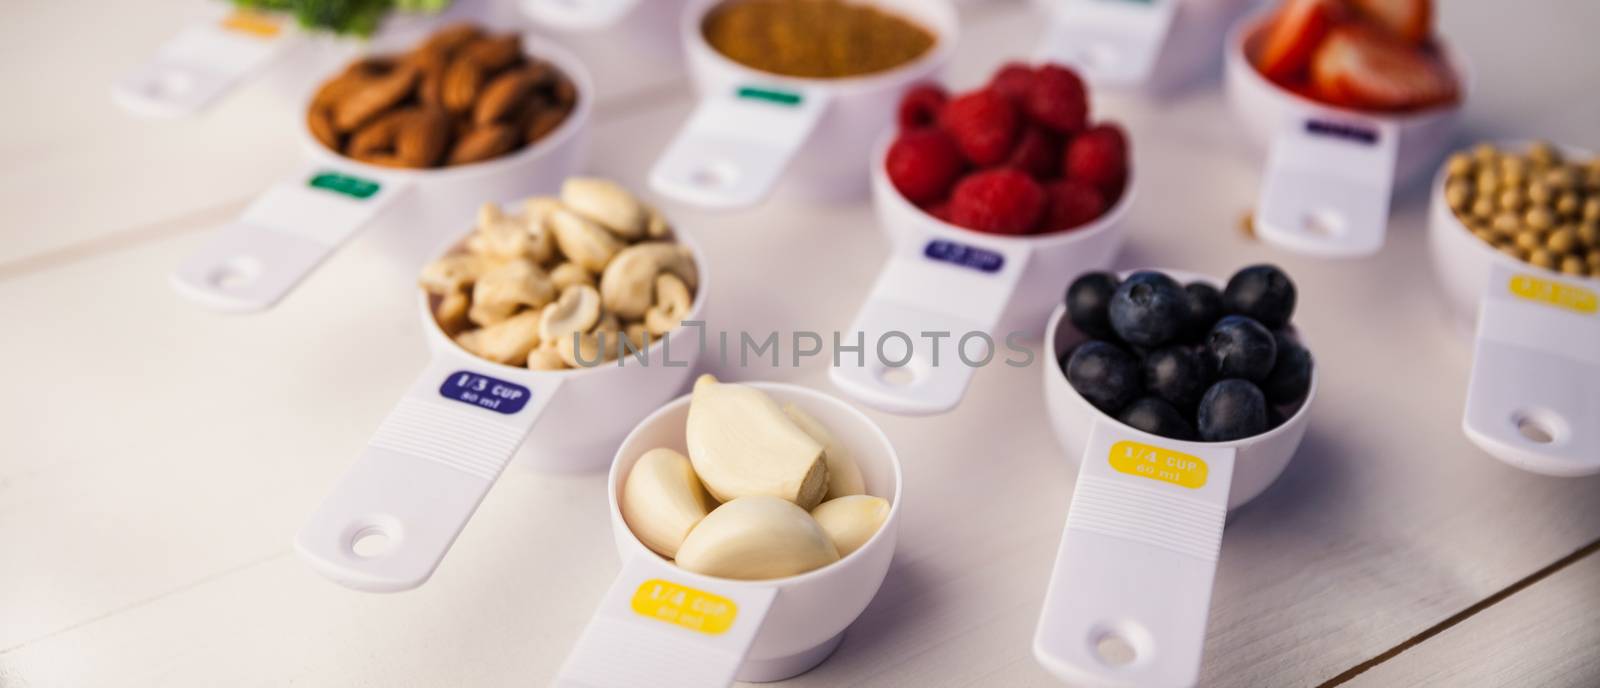 Portion cups of healthy ingredients on wooden table